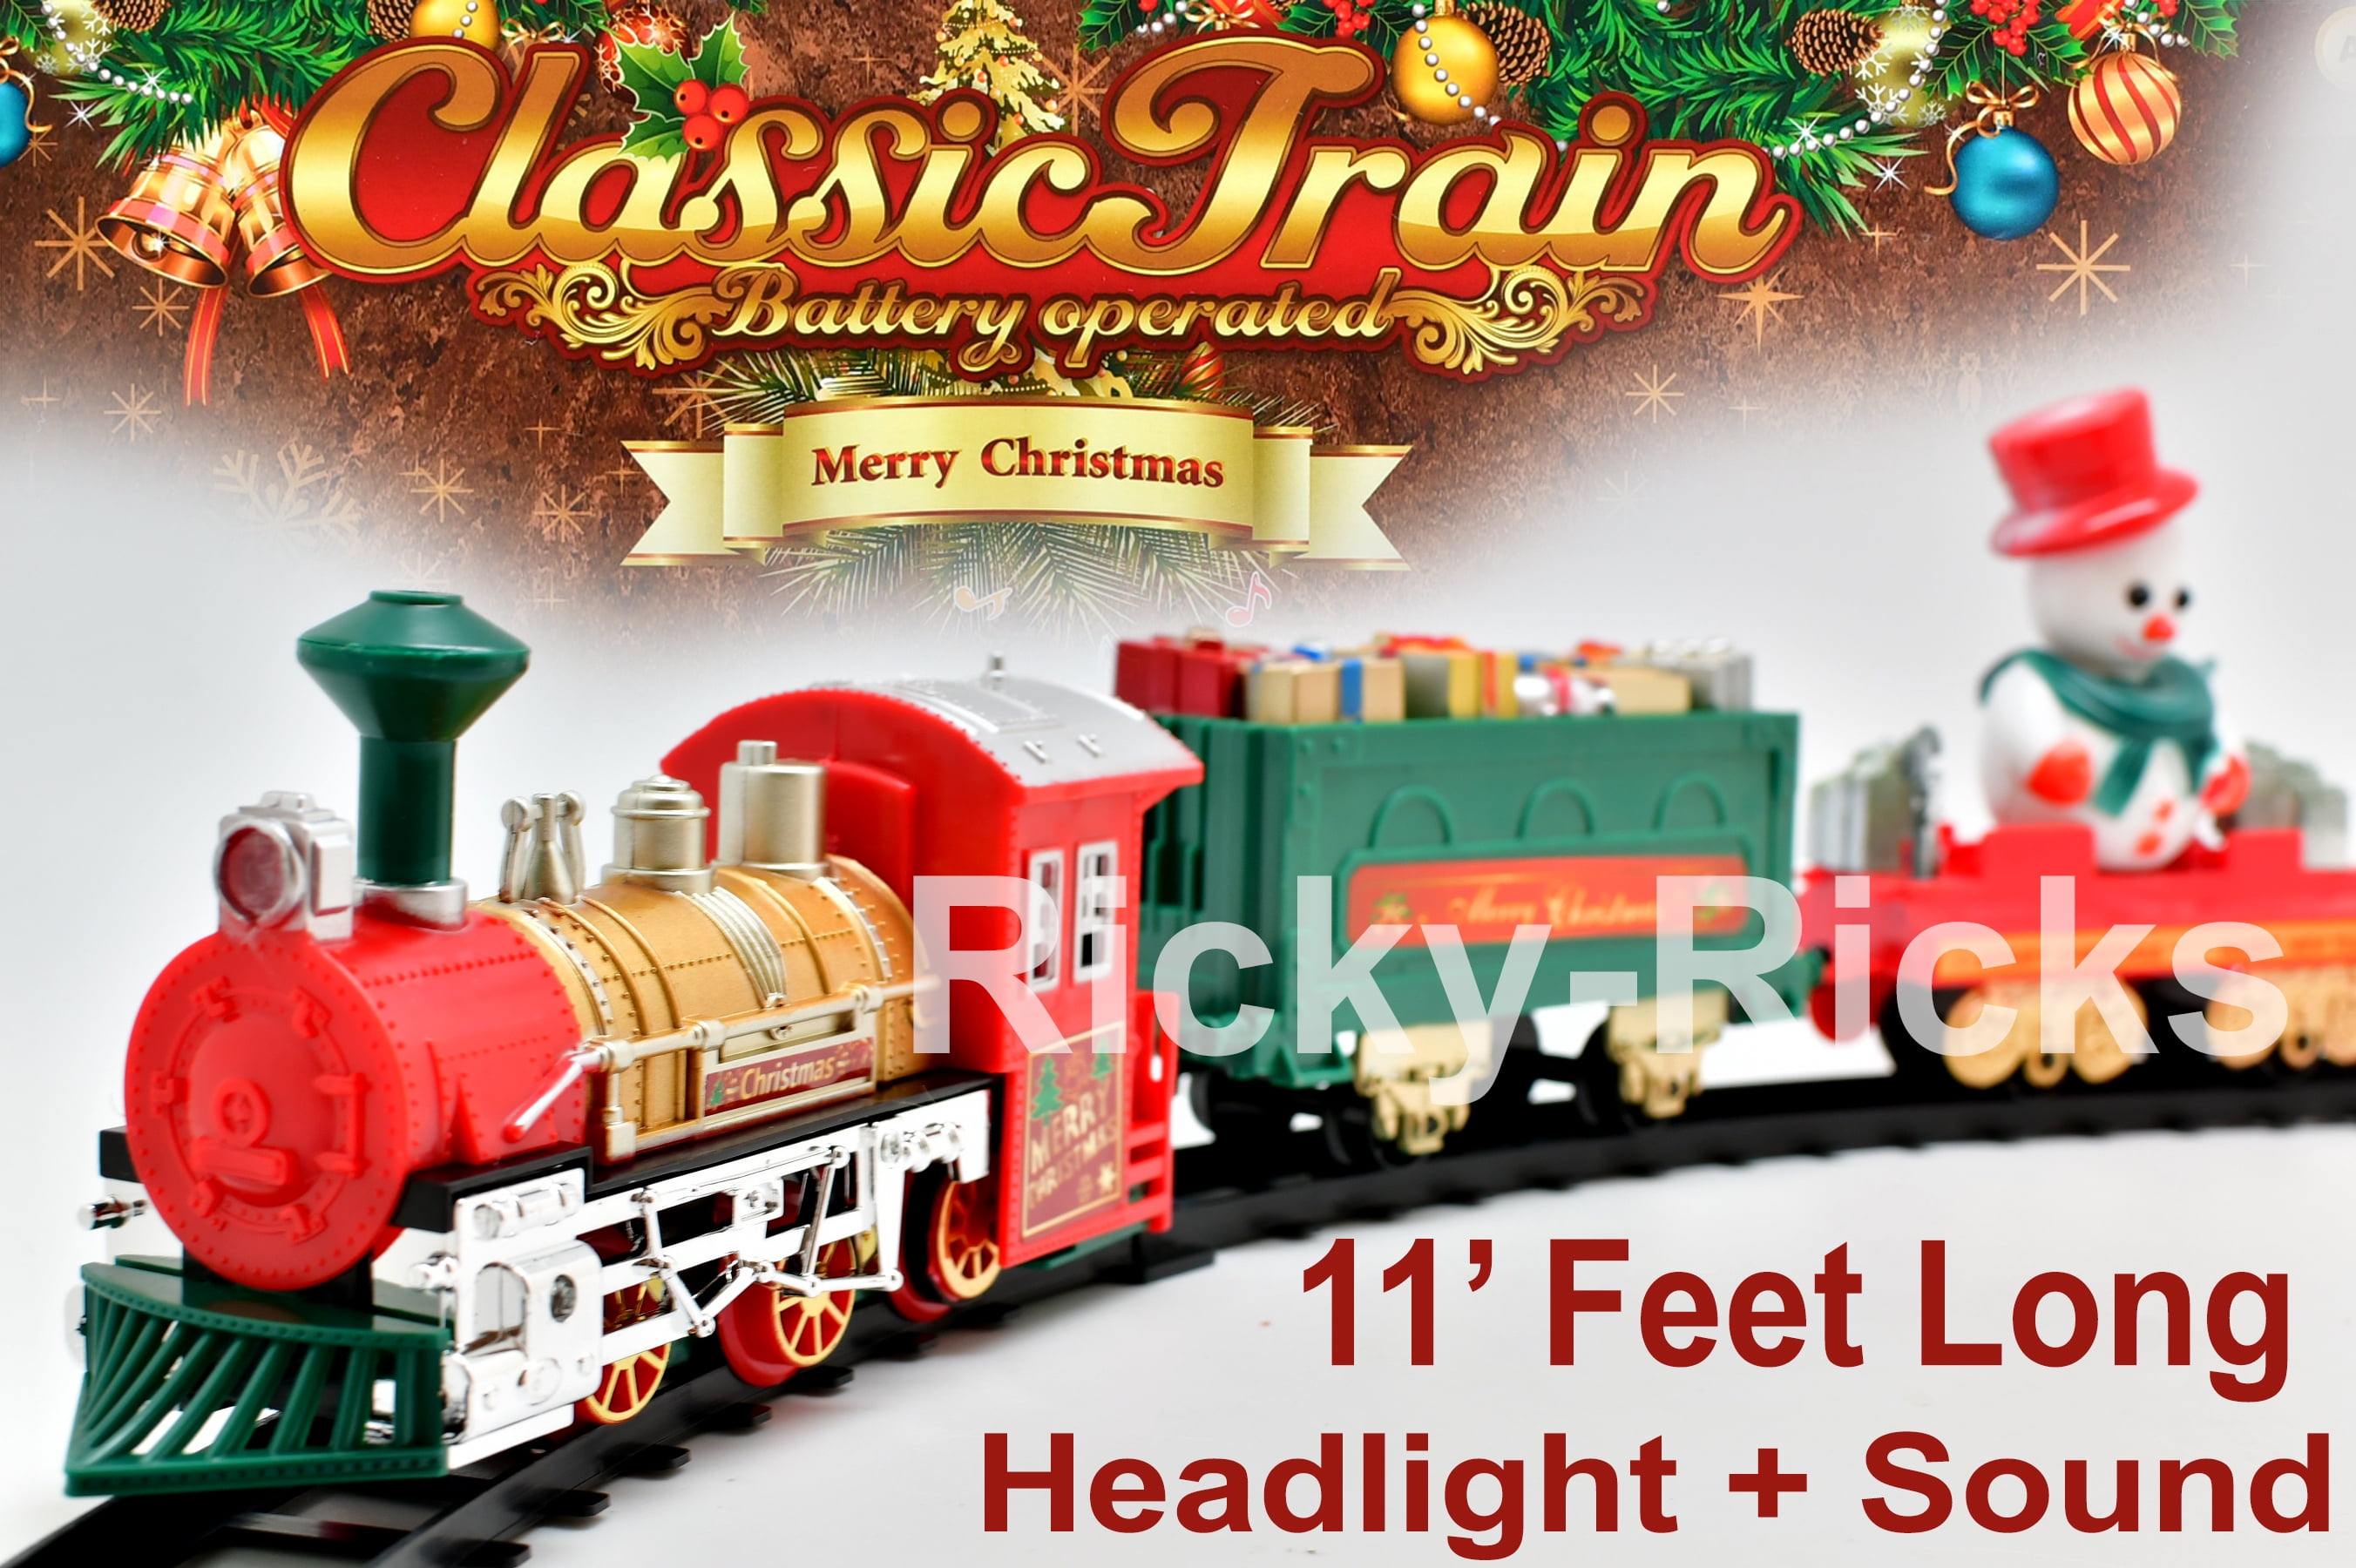 and Sounds Holiday Train Electric Railway Tracks Kids Train Toy 3D Assemble Train Set Home Decoration NUOBESTY 1 Set Christmas Train Toy Set for Under The Tree with Lights